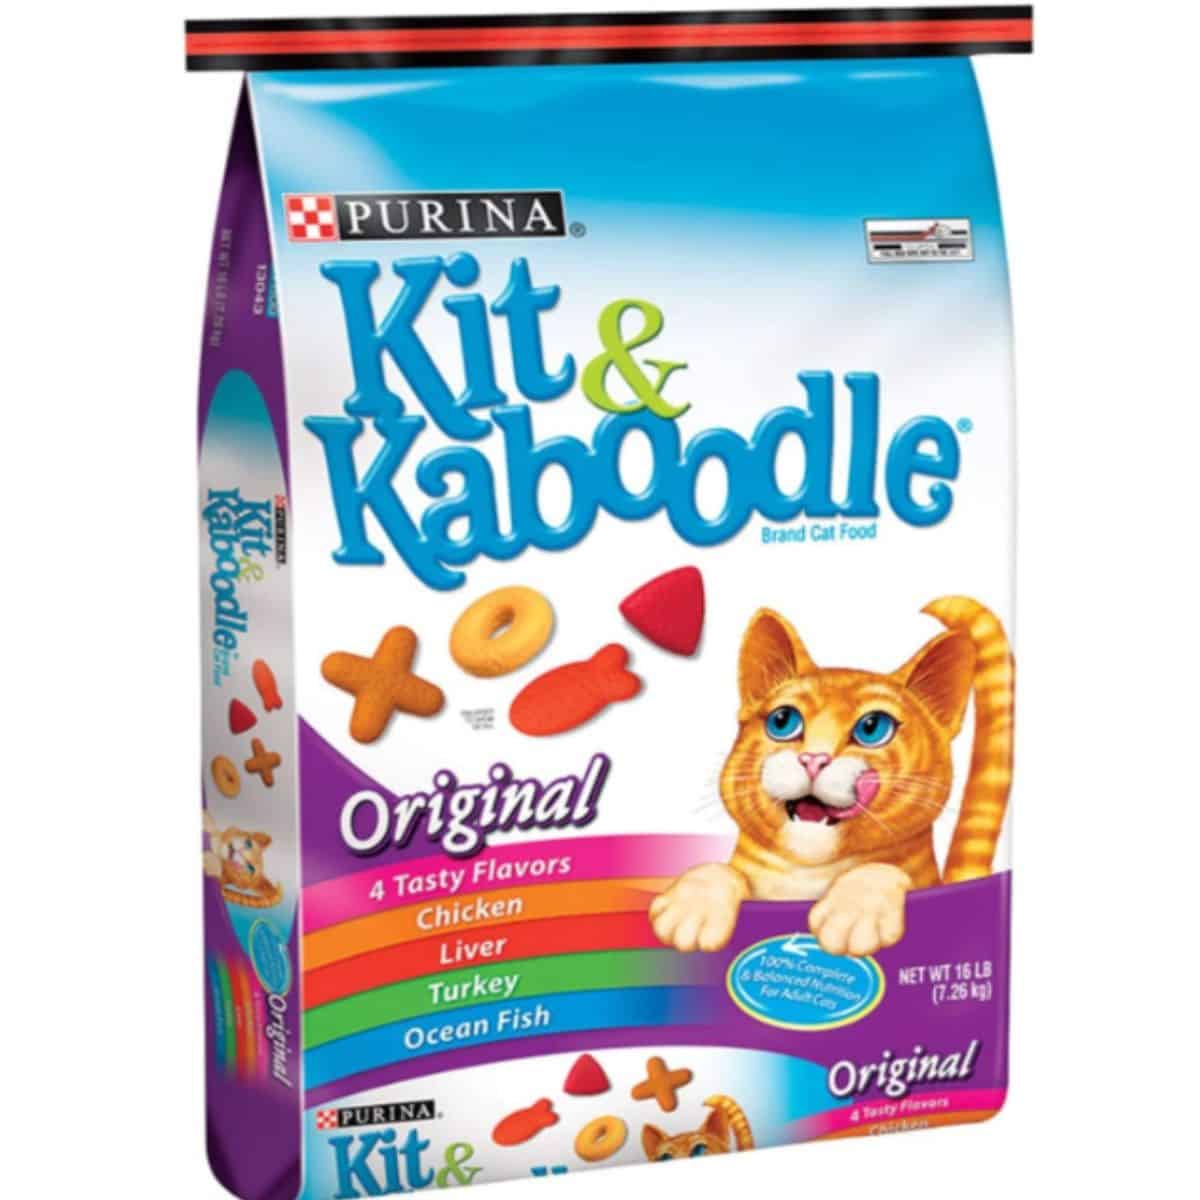 Kit n’ Kaboodle Dry Food By Nestlé